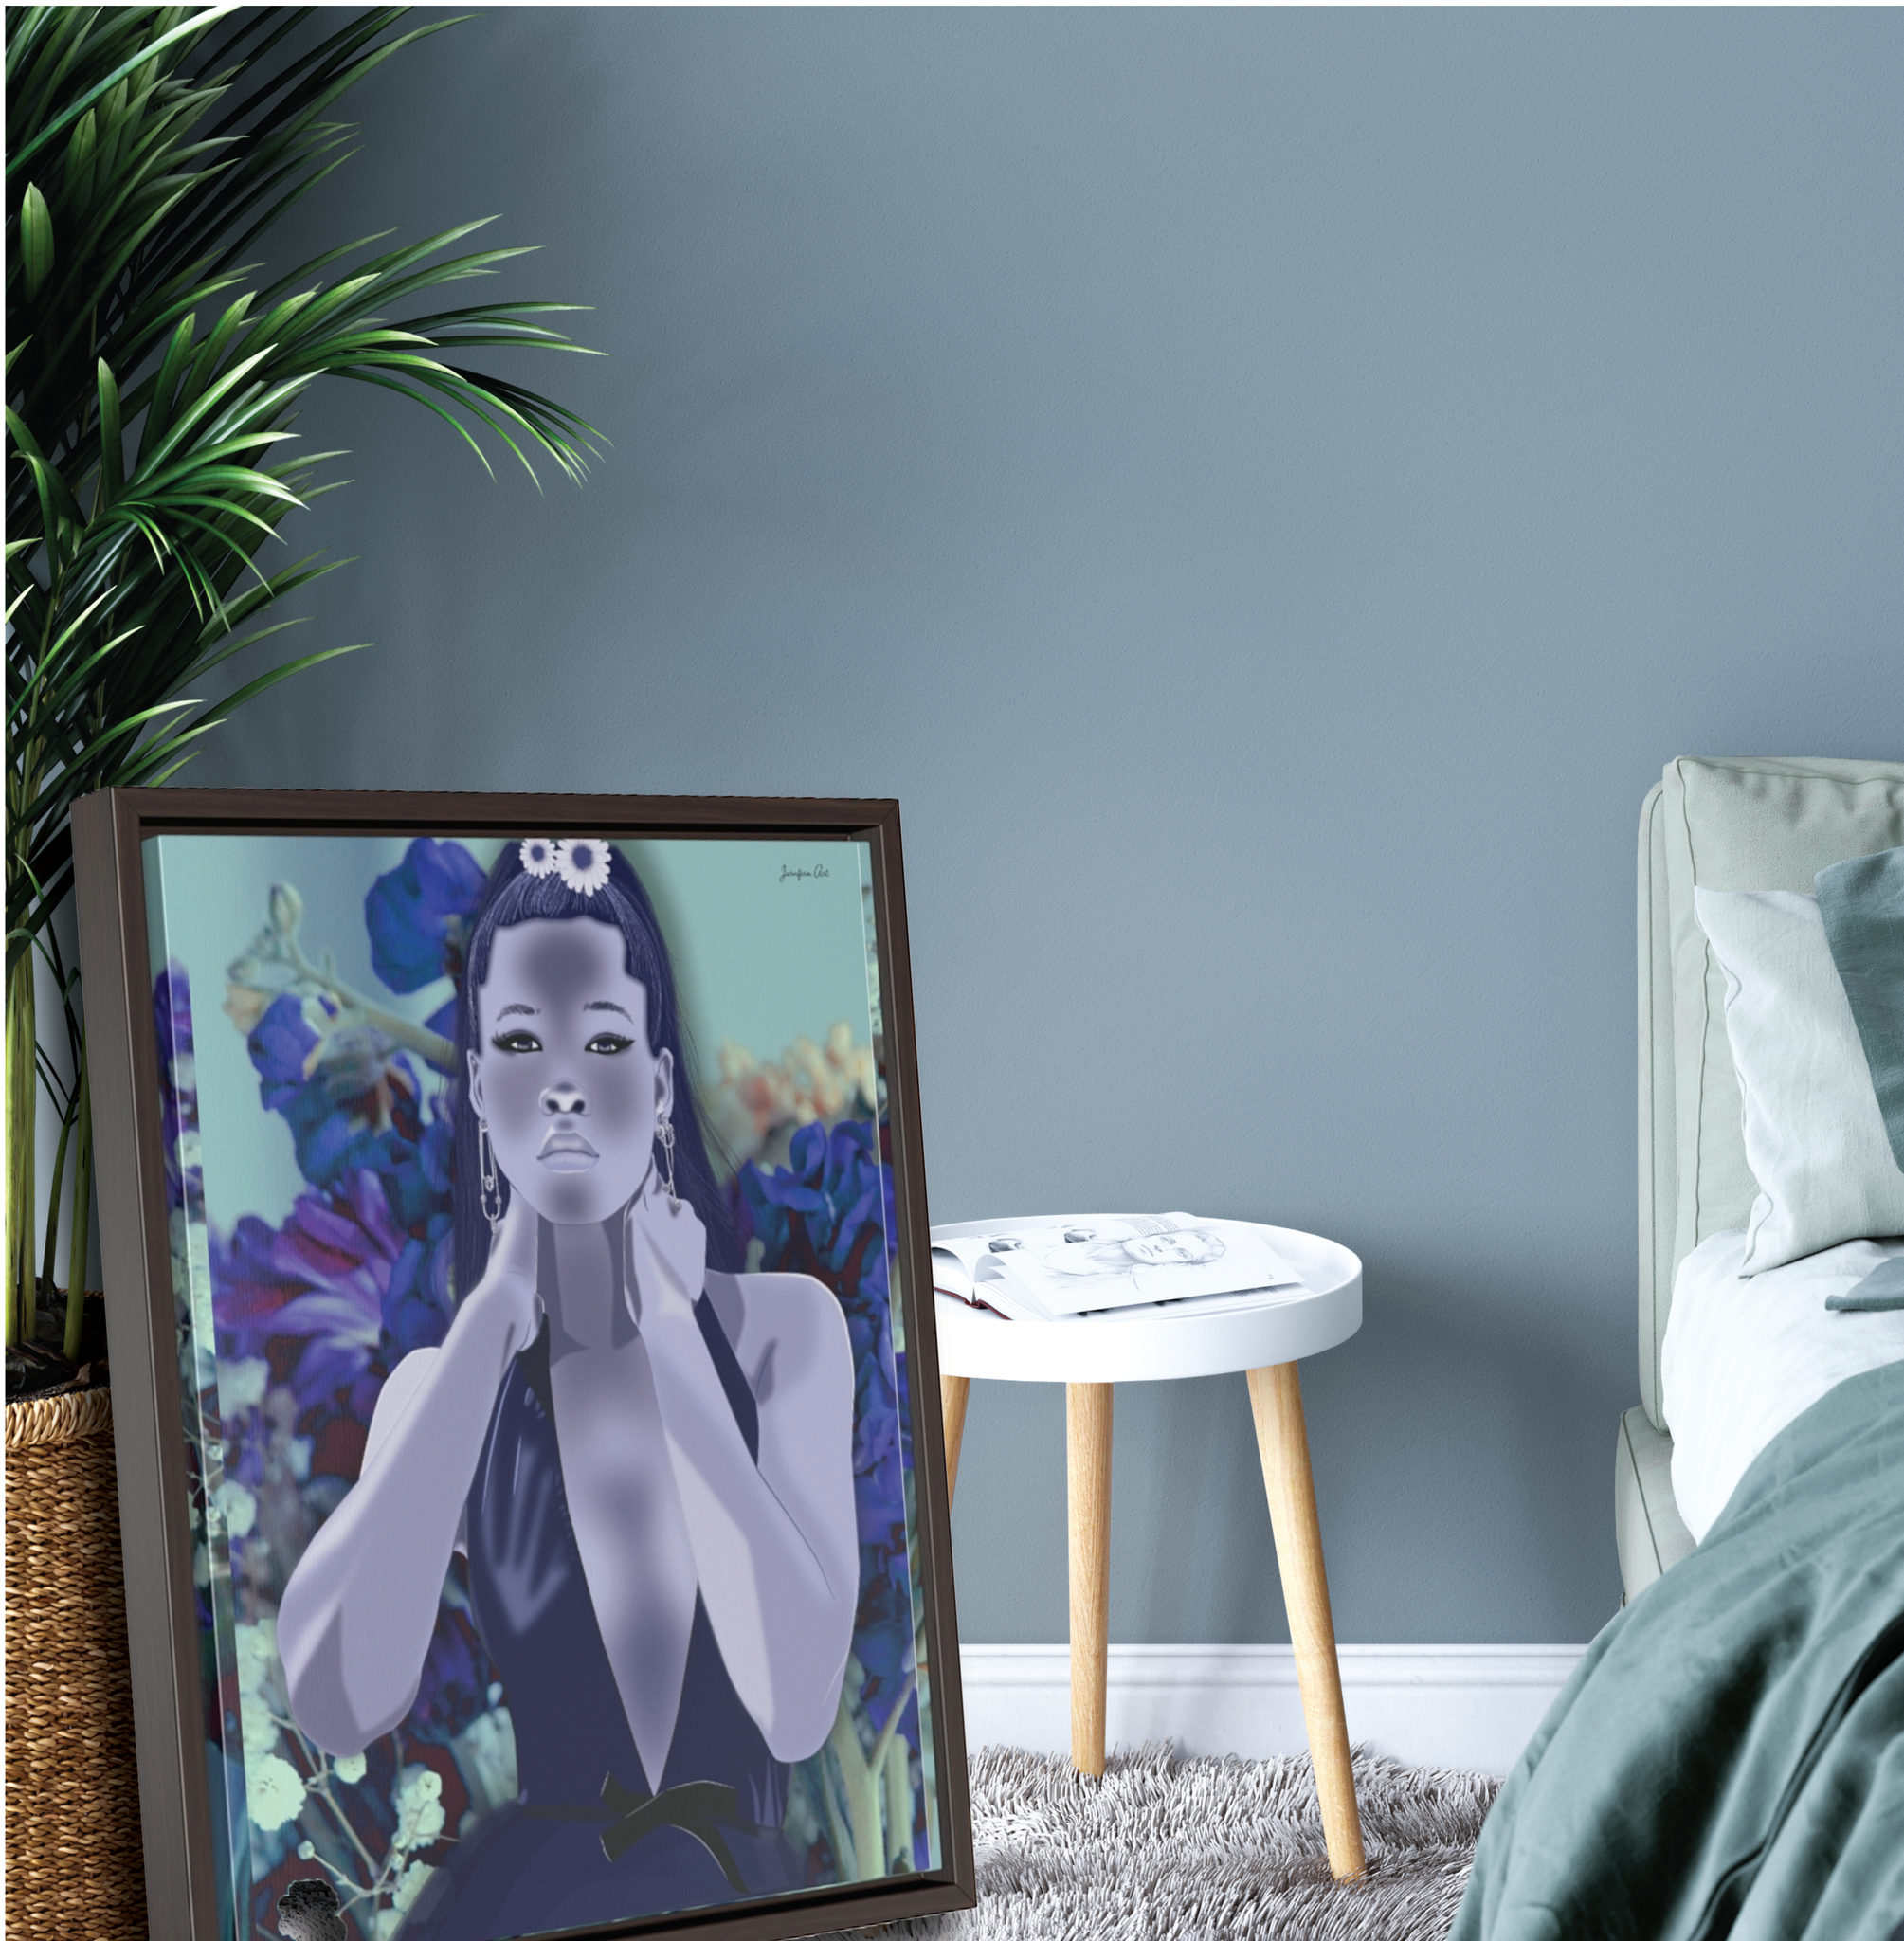 A large framed canvas illustration of actress Storm Reid posing in a blue deep-neck dress, with a blue and purple floral background. The canvas is leaning up against a potted plant next to a bed